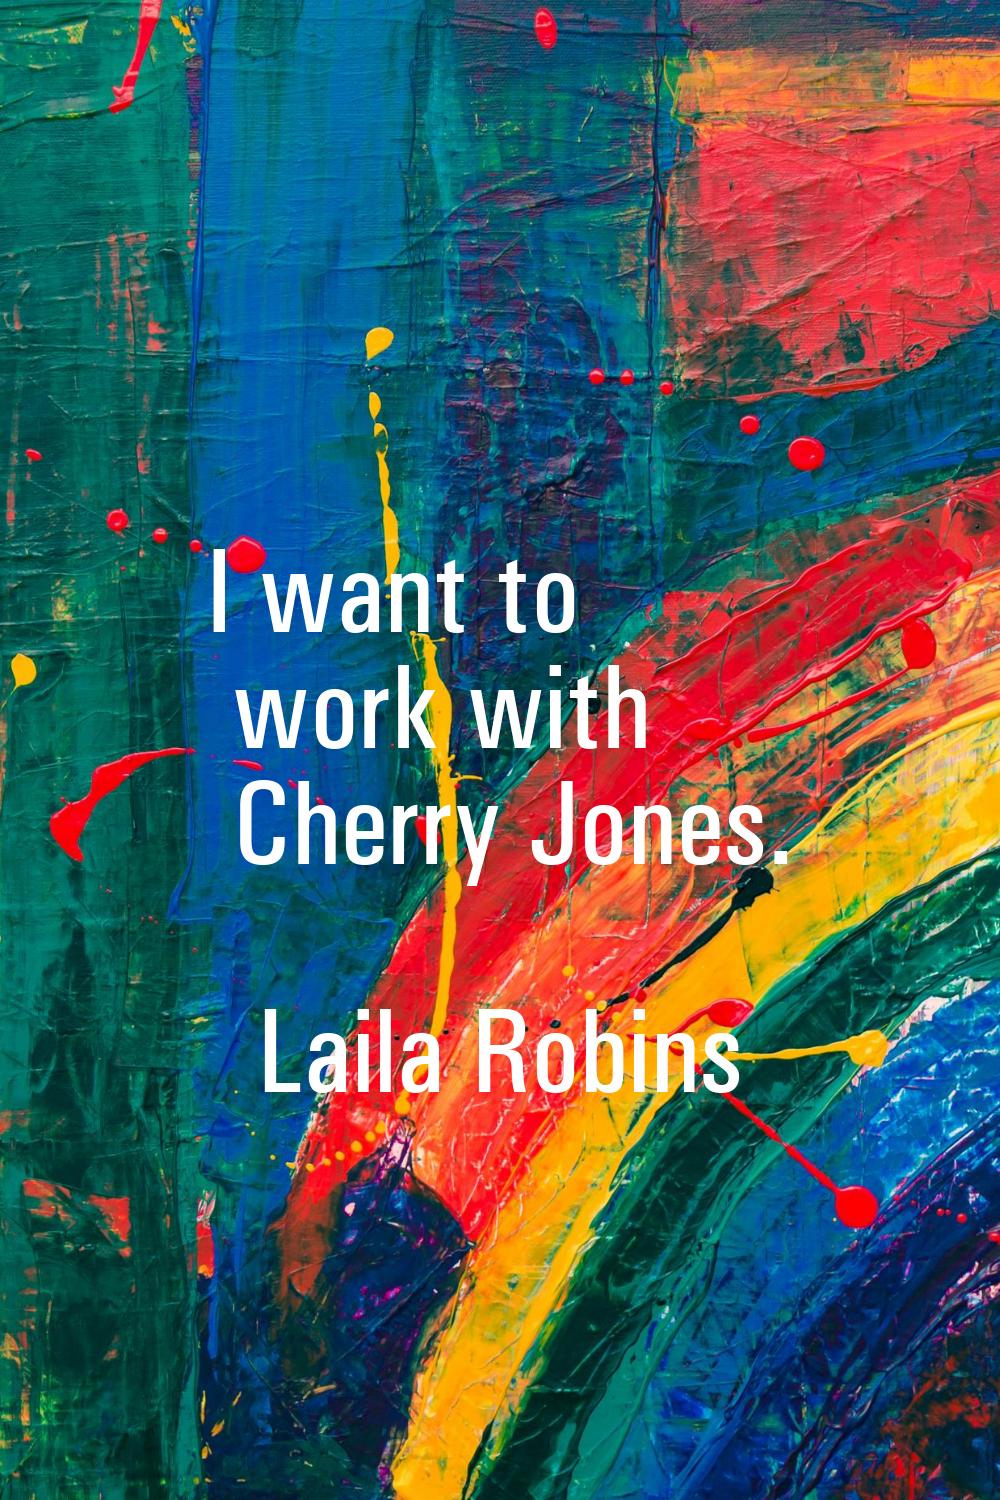 I want to work with Cherry Jones.